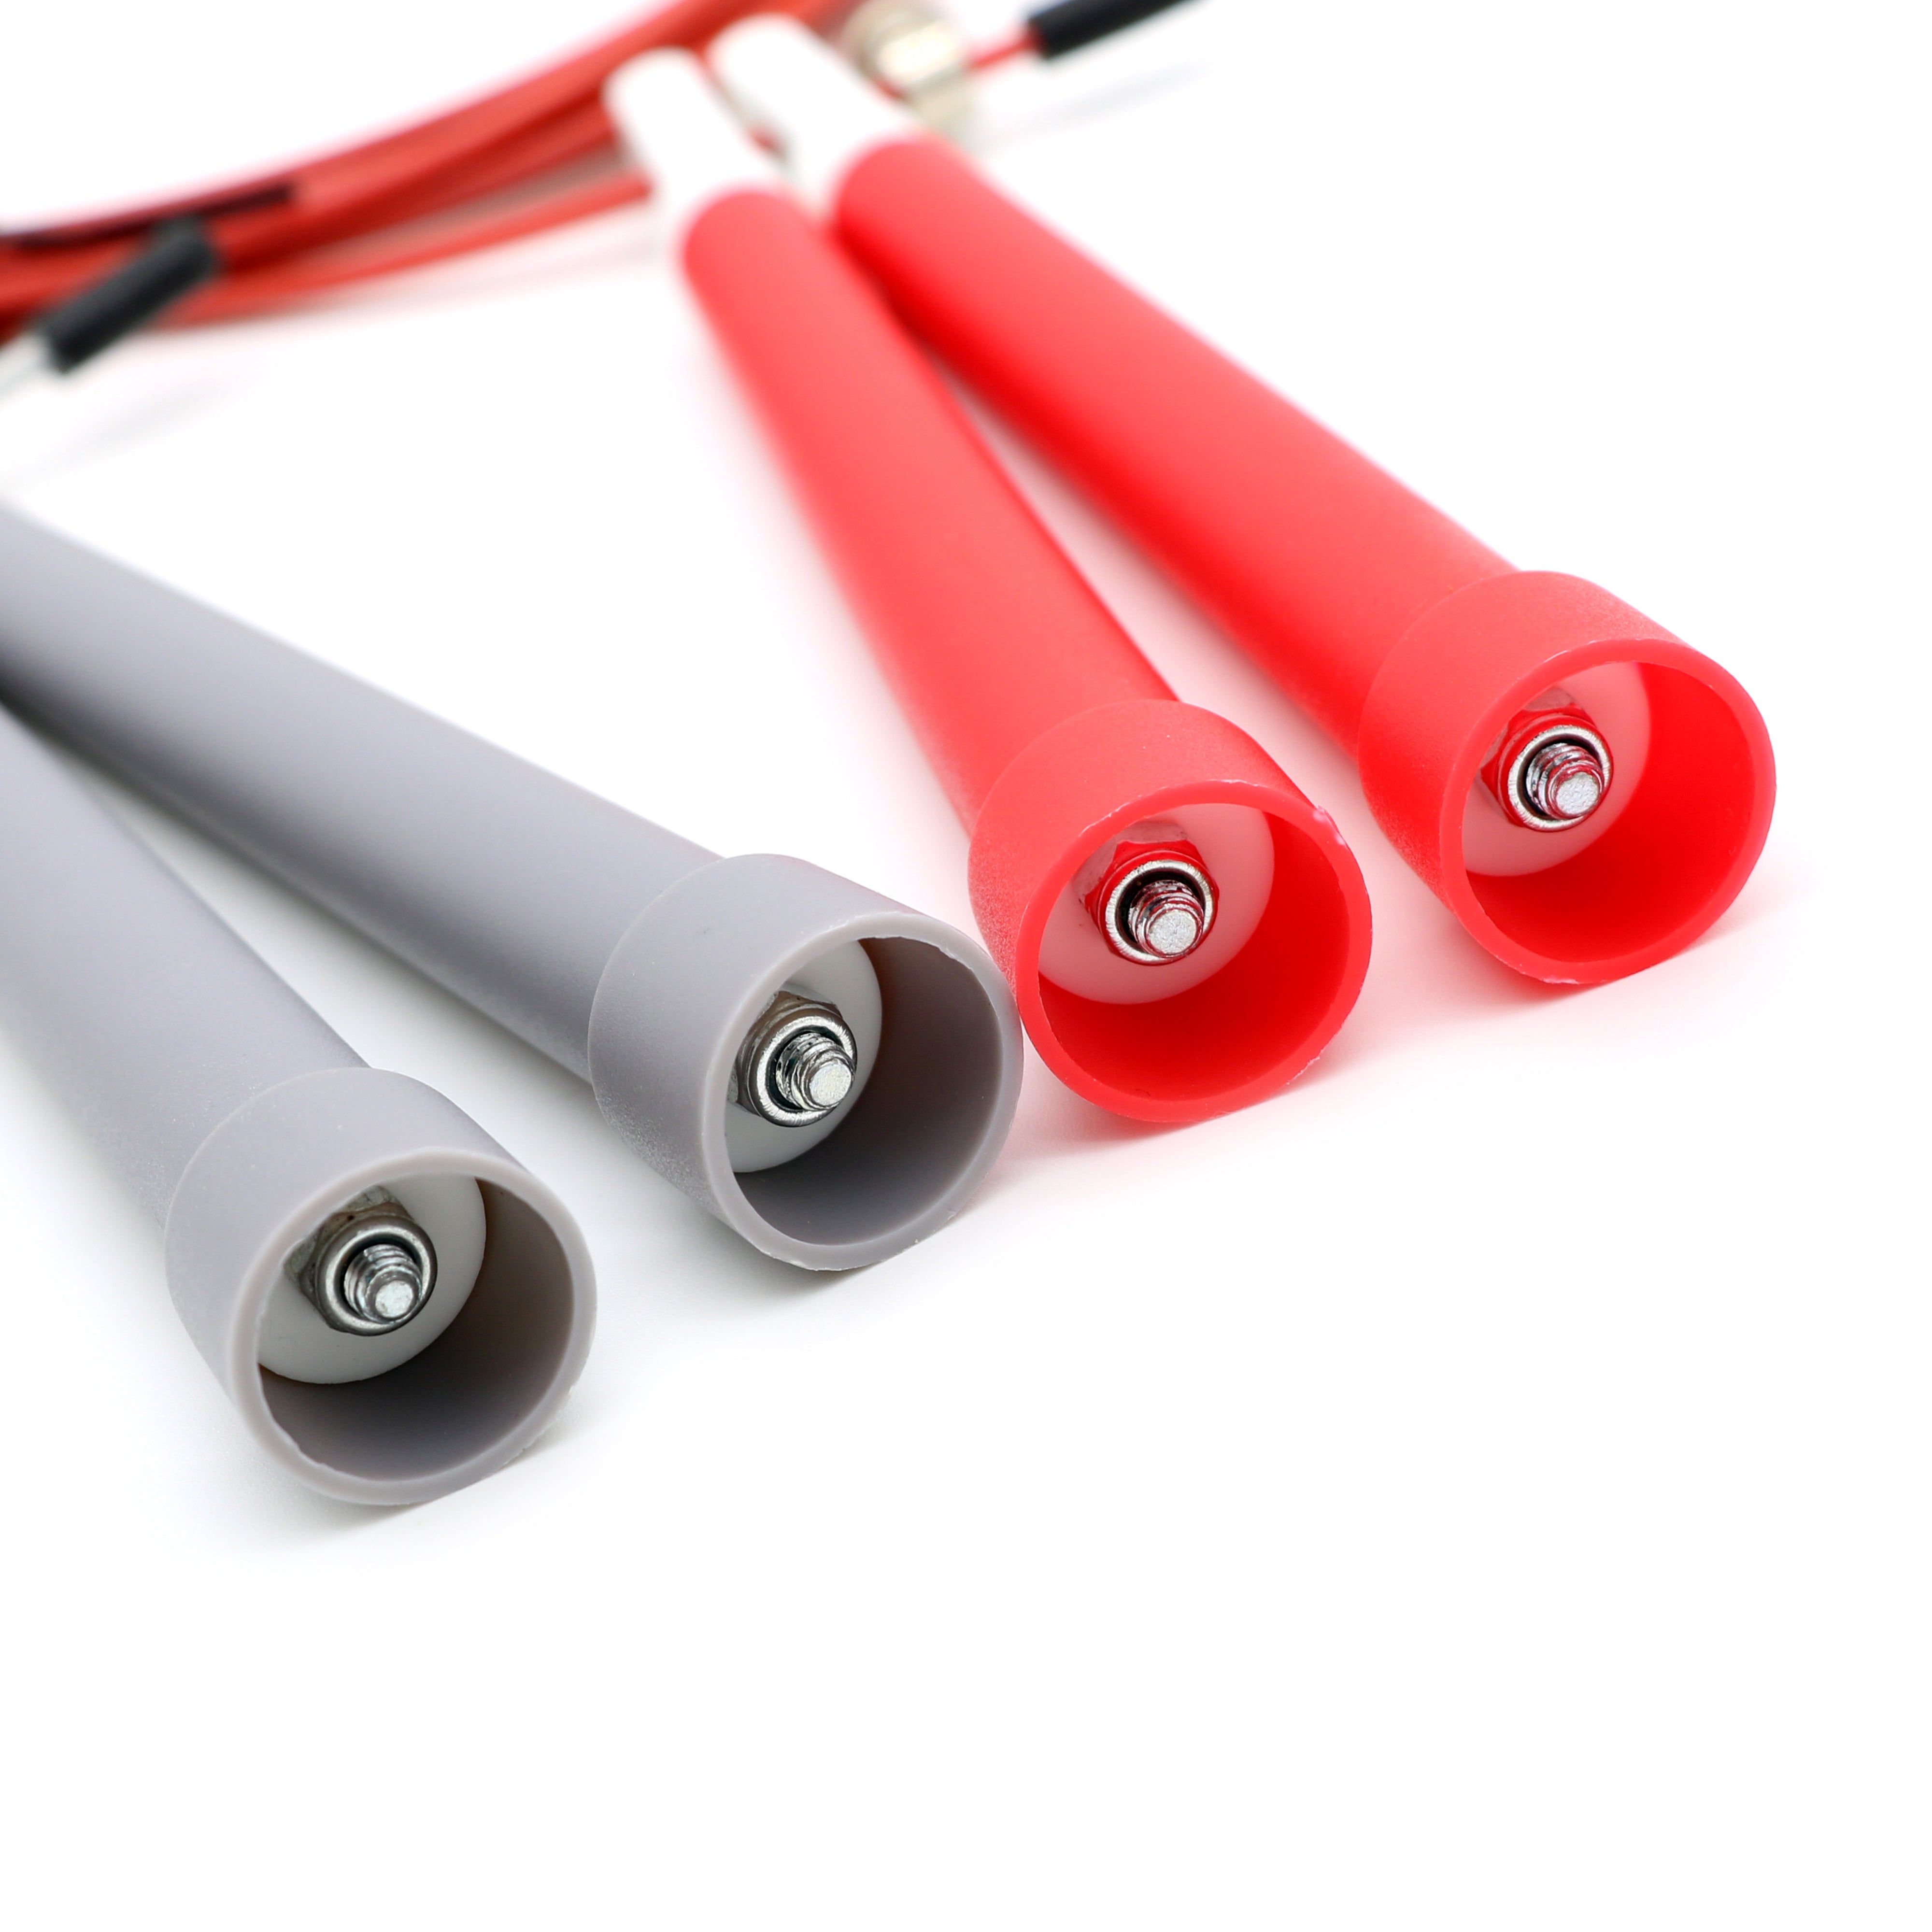 Crossfit & Boxing Jump Rope by EZB